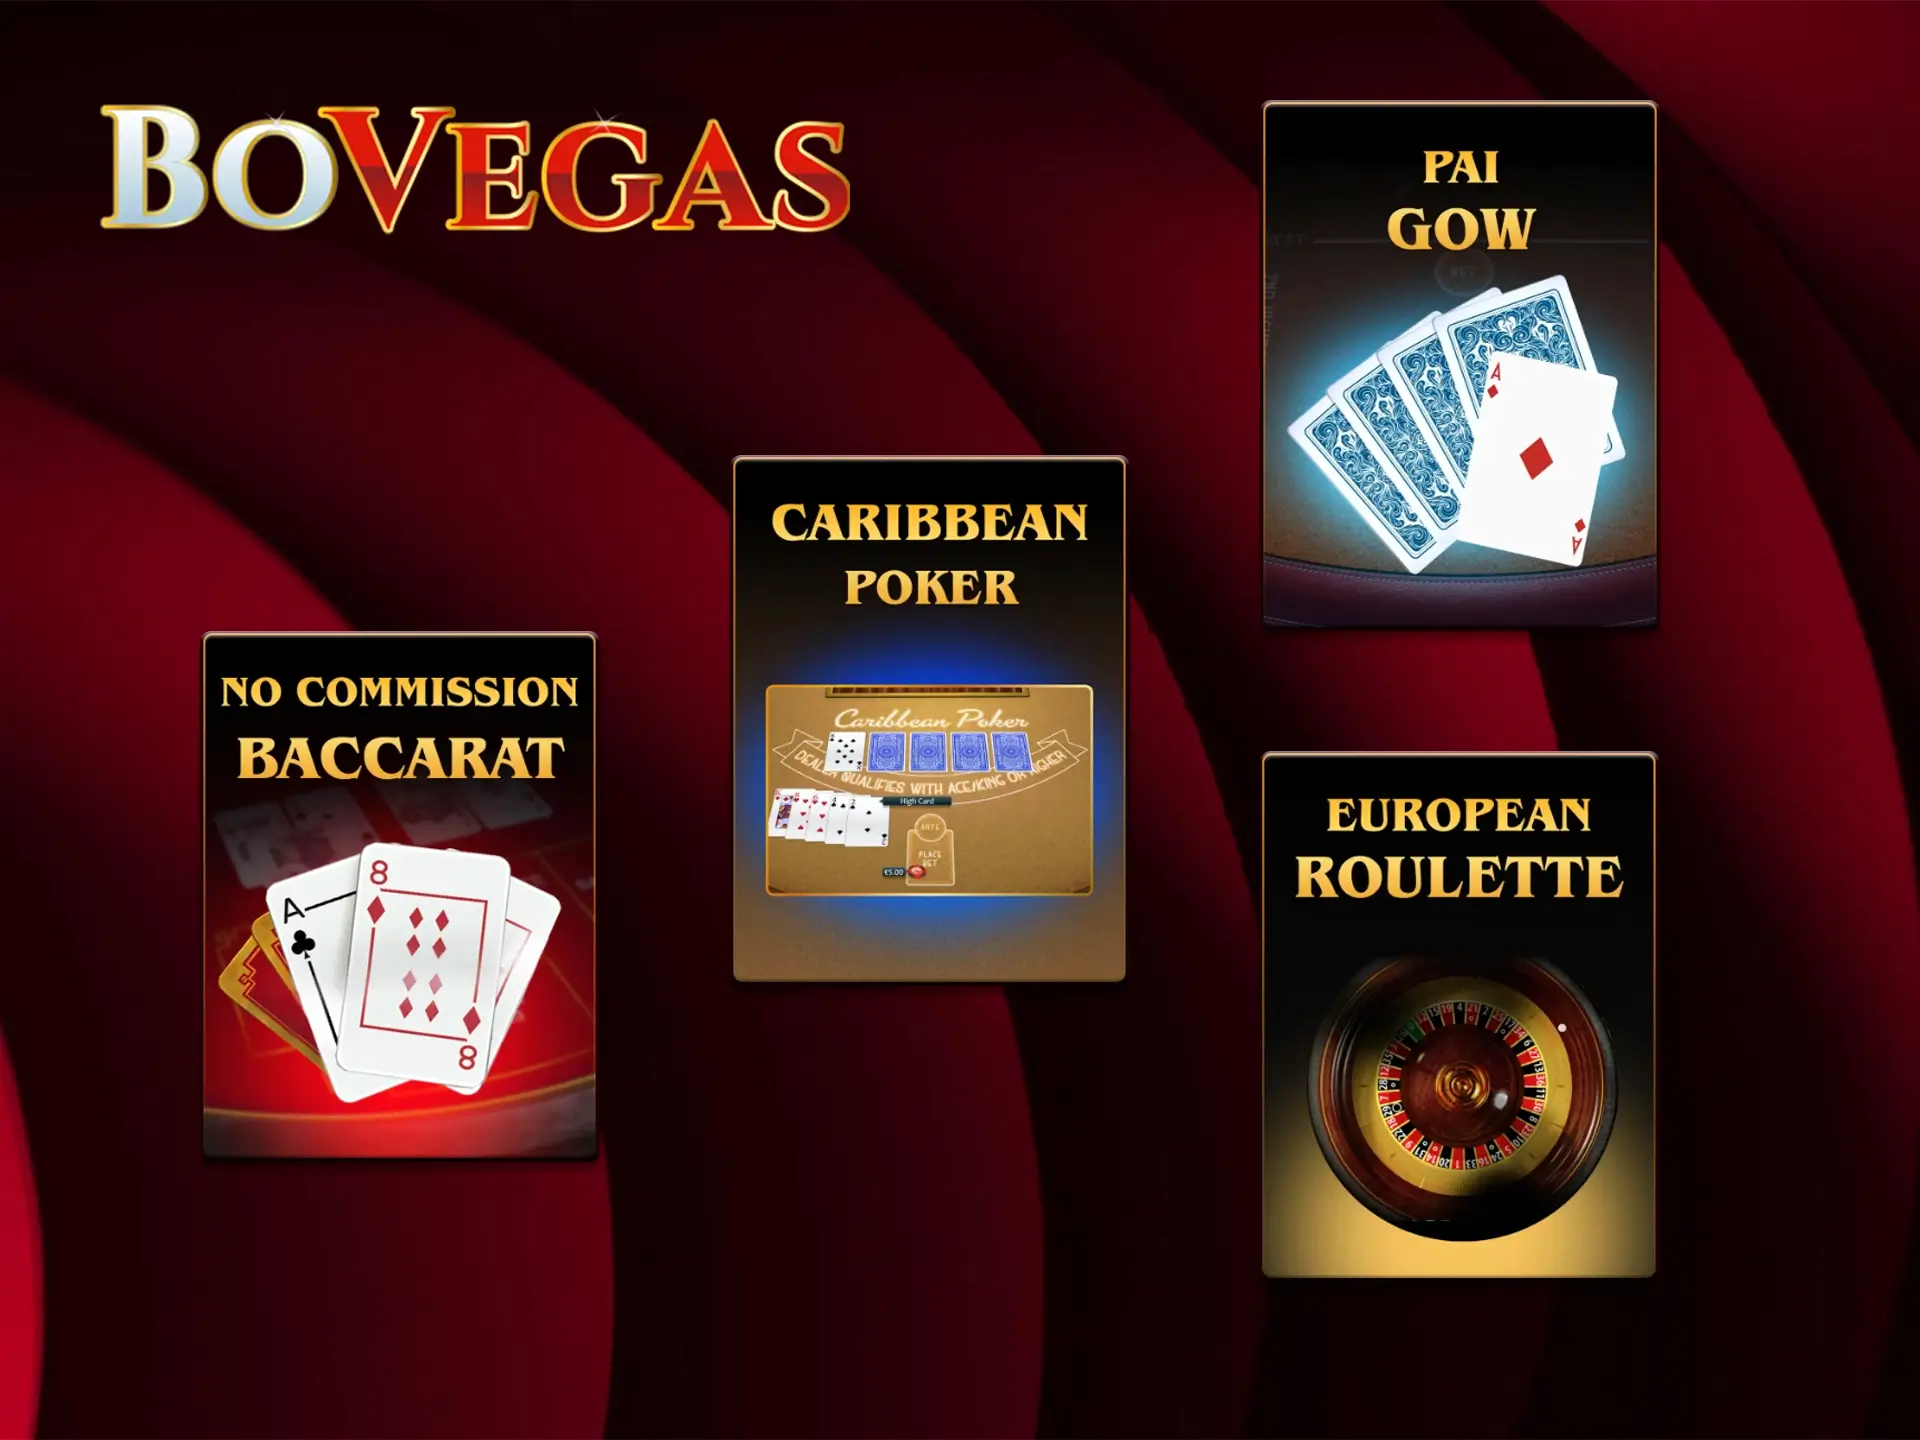 All the highest quality and most famous games are gathered at Australia's best BoVegas casino.